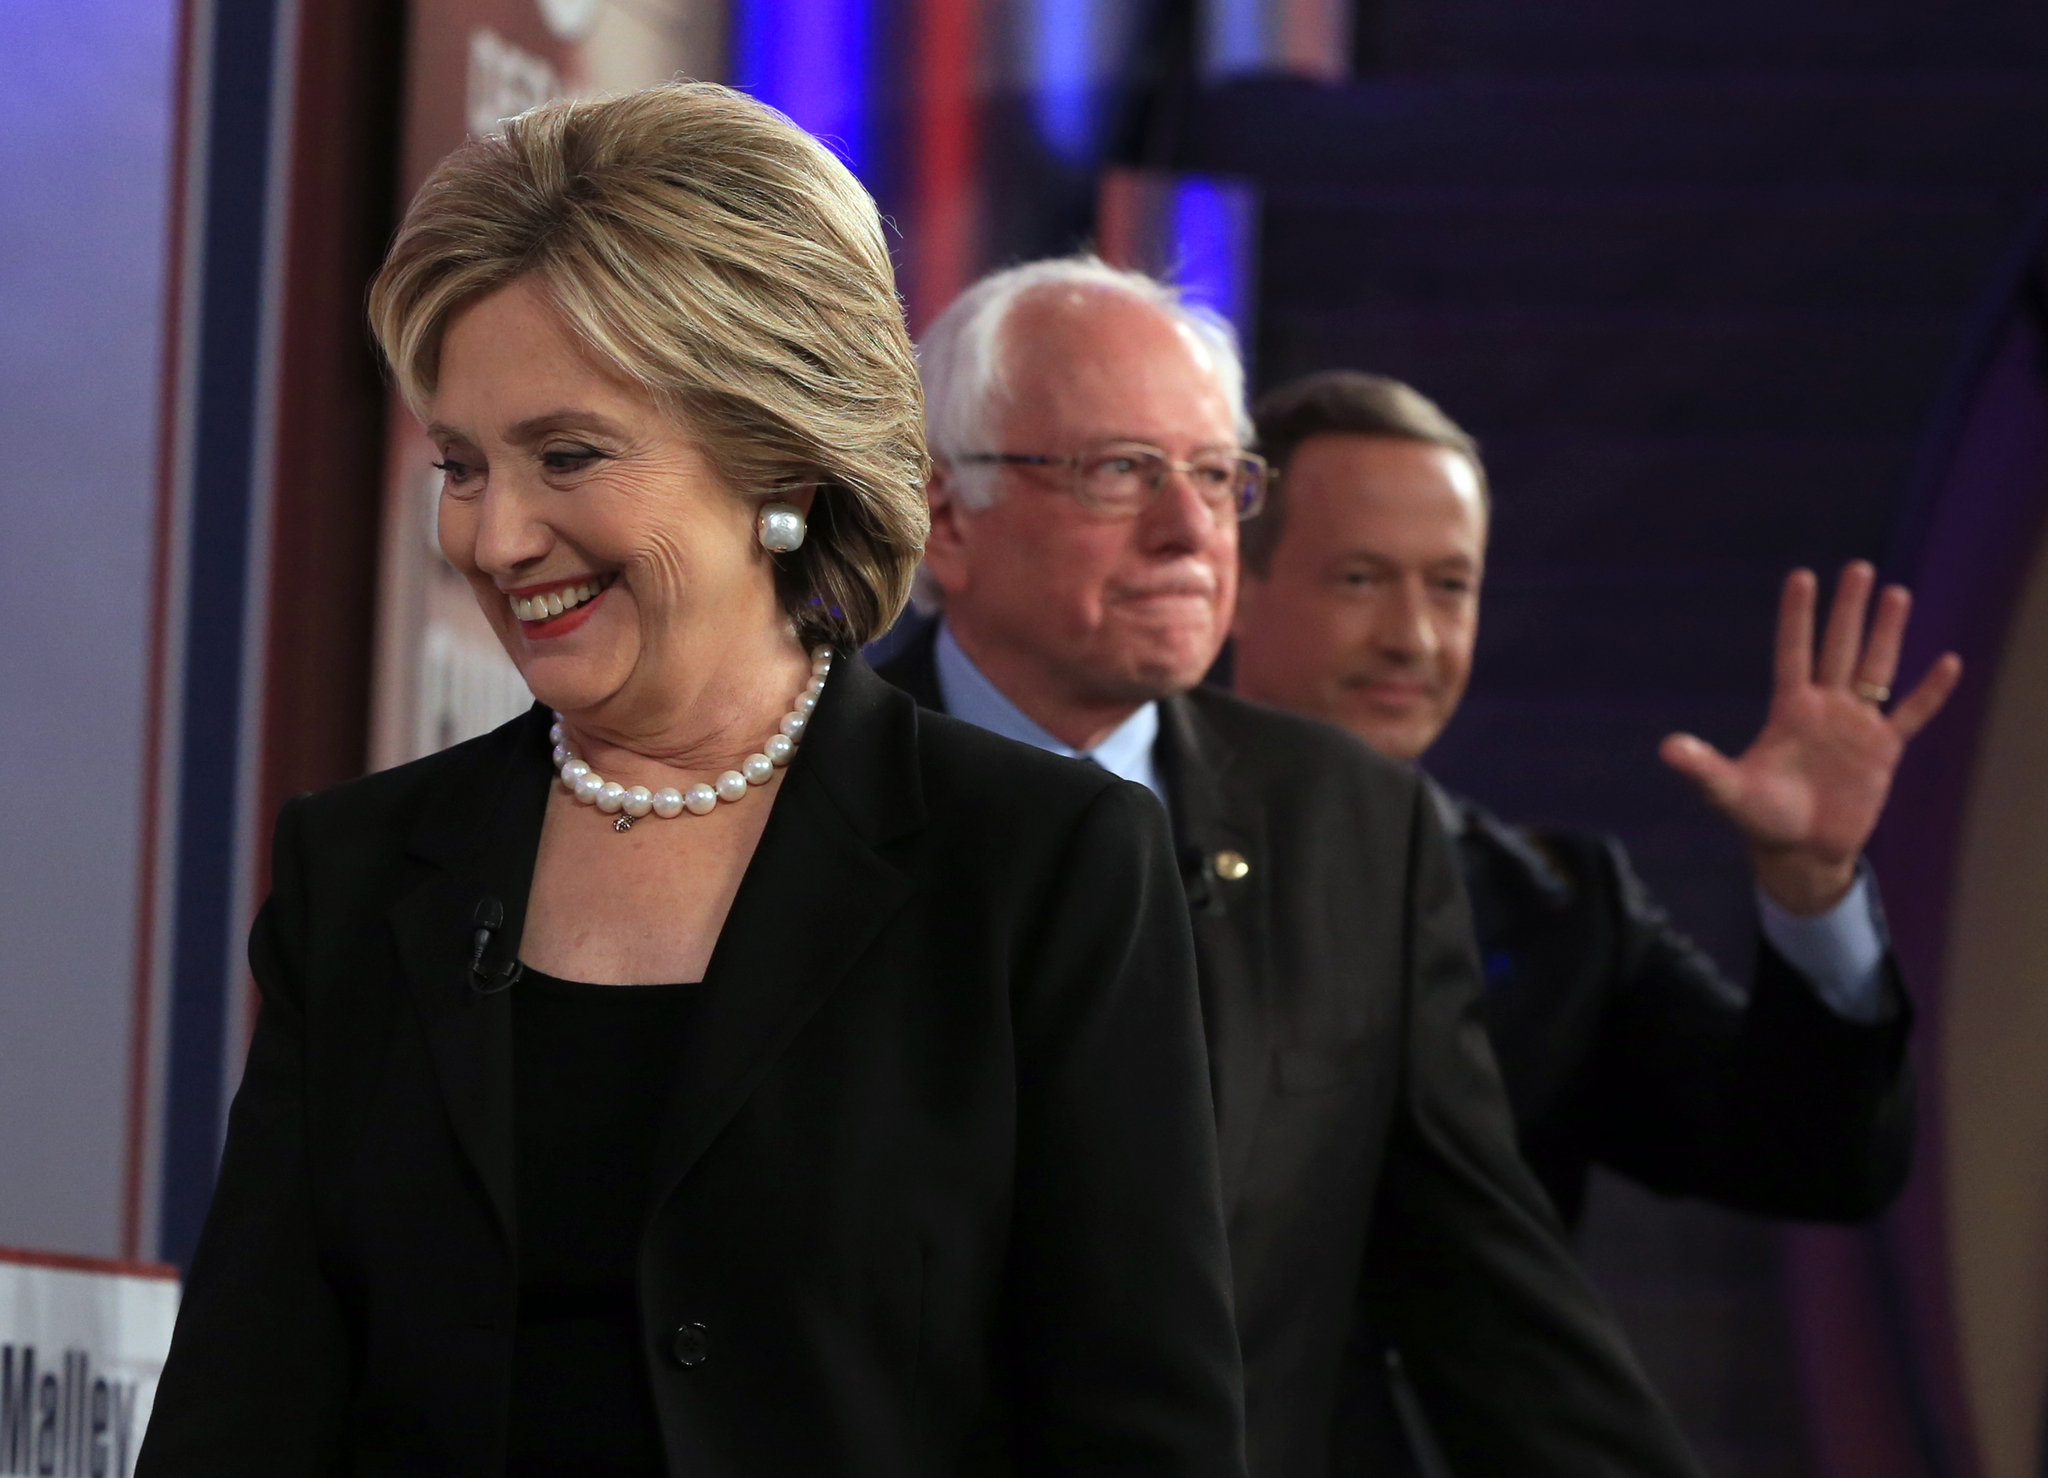 Hillary Clinton leaving a debate stage with rivals for the 2016 Democratic presidential convention, U.S. Senator Bernie Sanders and former Maryland governor Martin O'Malley. (nola.com)